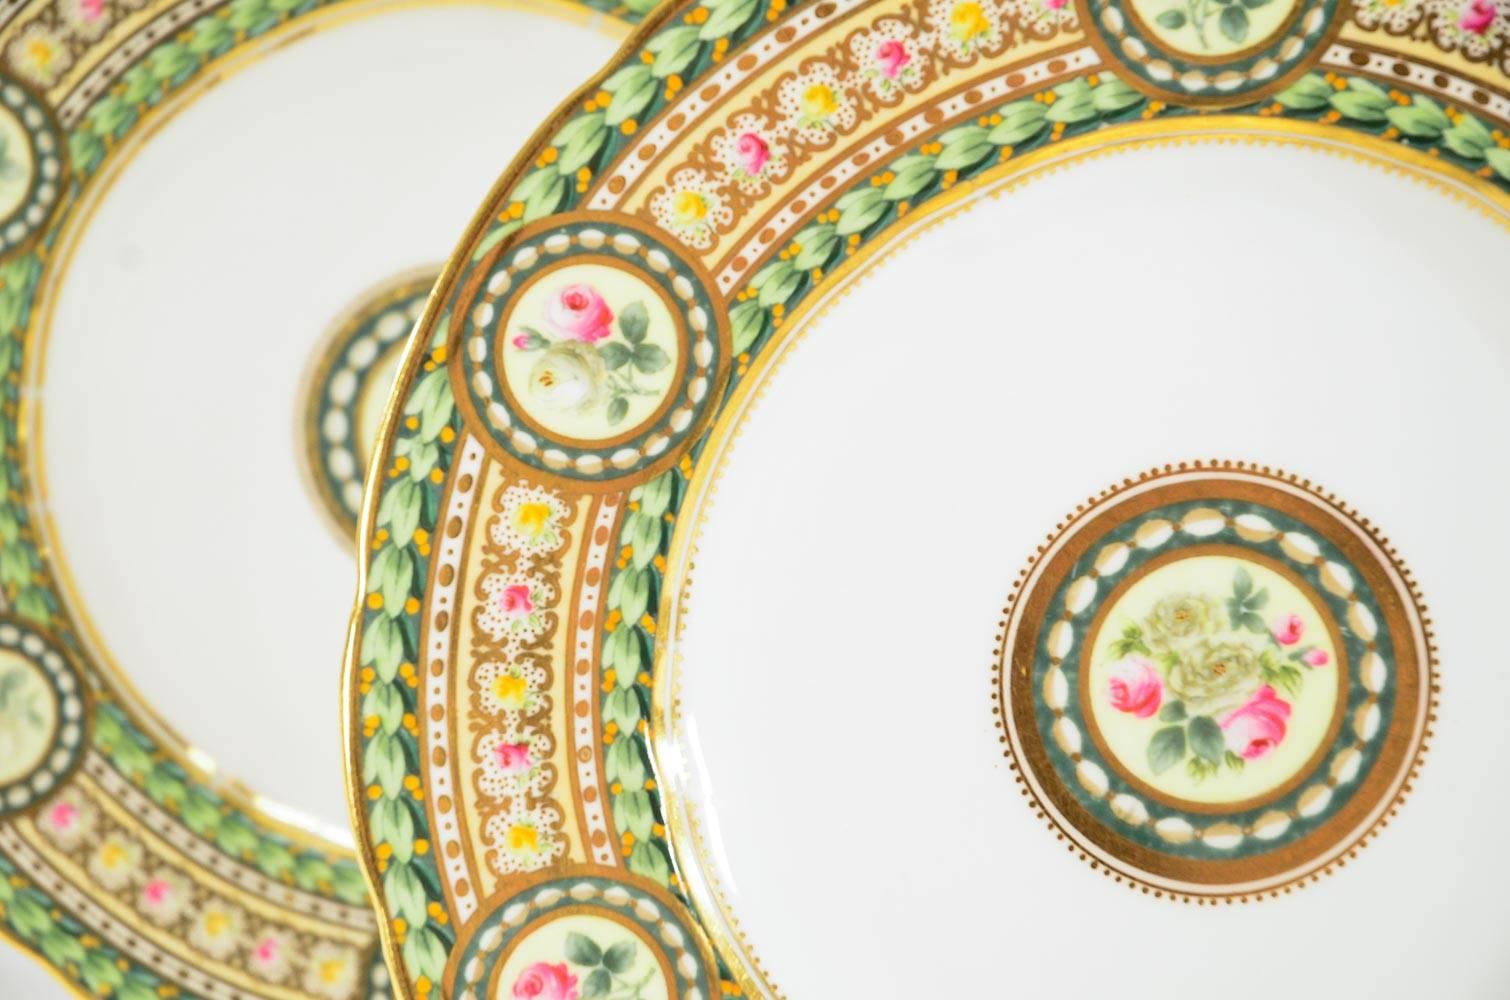 Enameled Set of 12 Copeland's 19th C Hand Painted Dessert Plates w/ Roses & Leaves